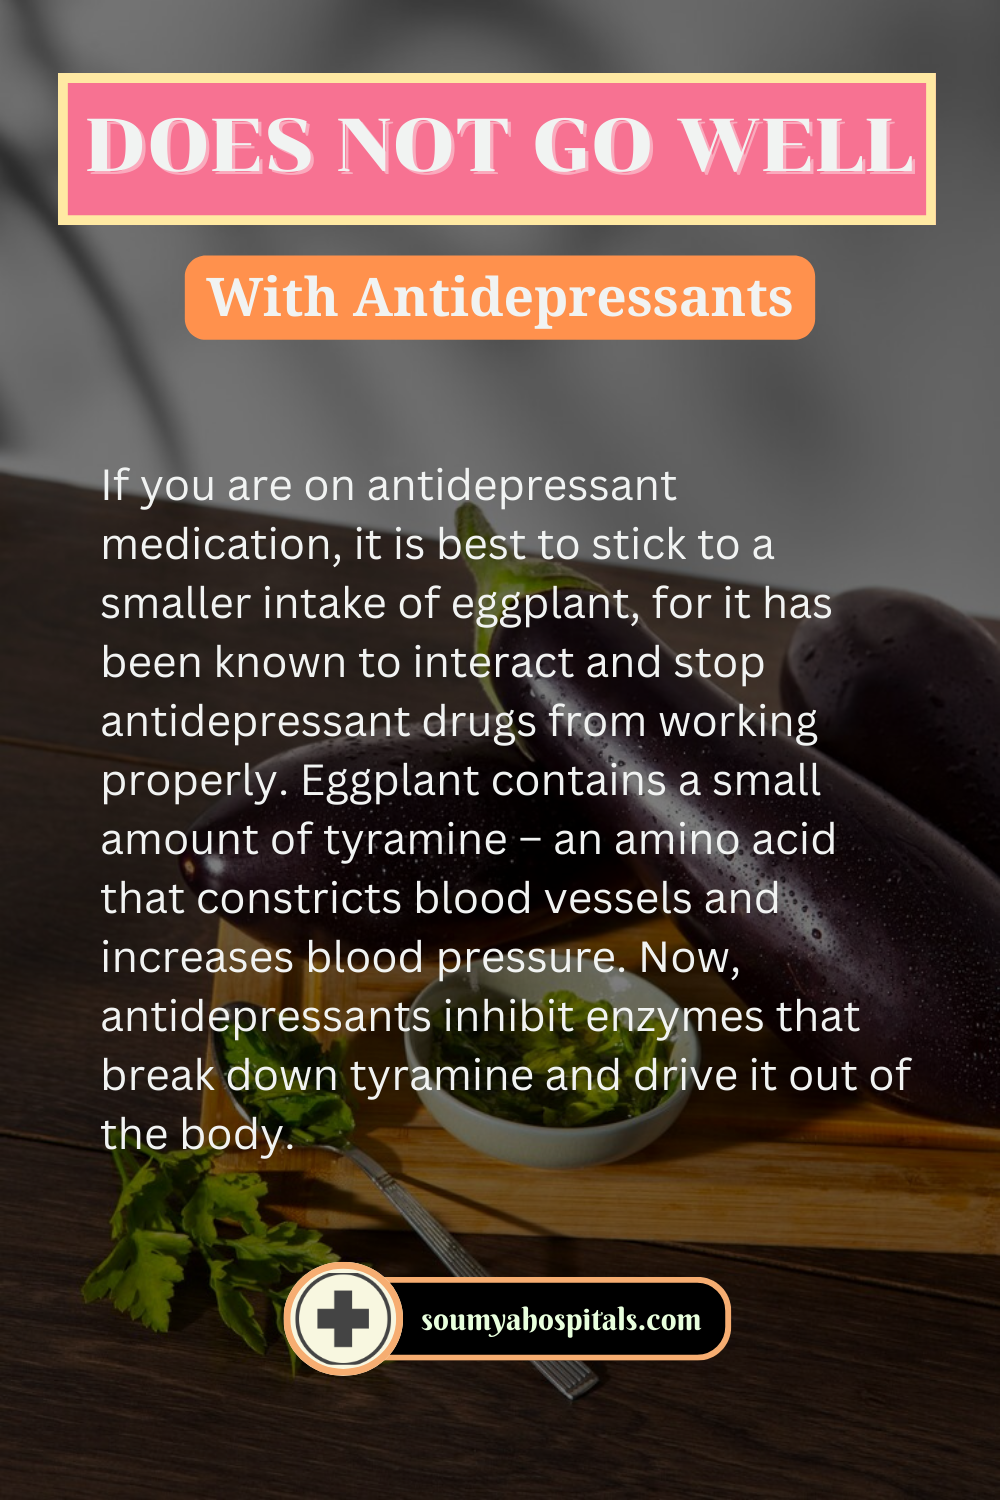 Side Effects Of Eating Eggplant With Antidepressants